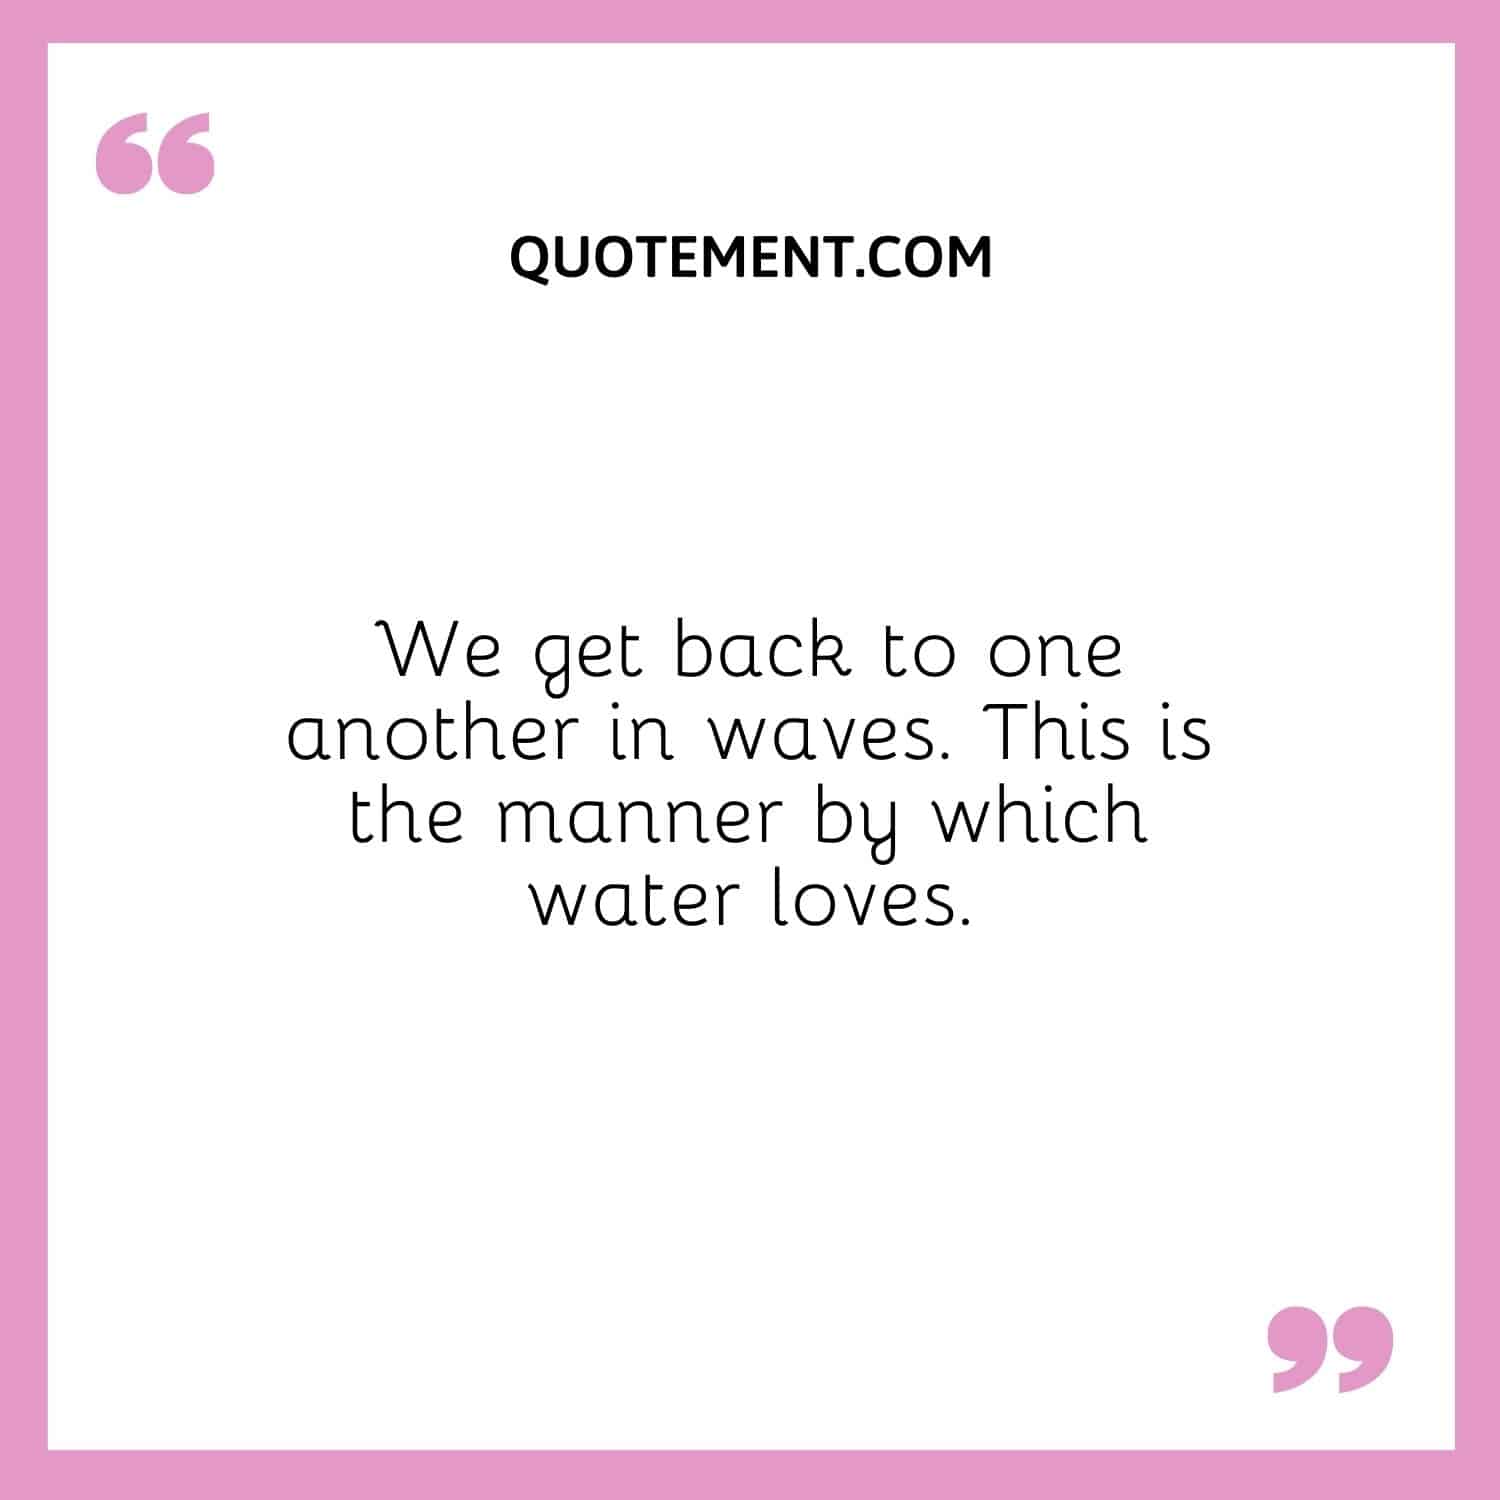 We get back to one another in waves